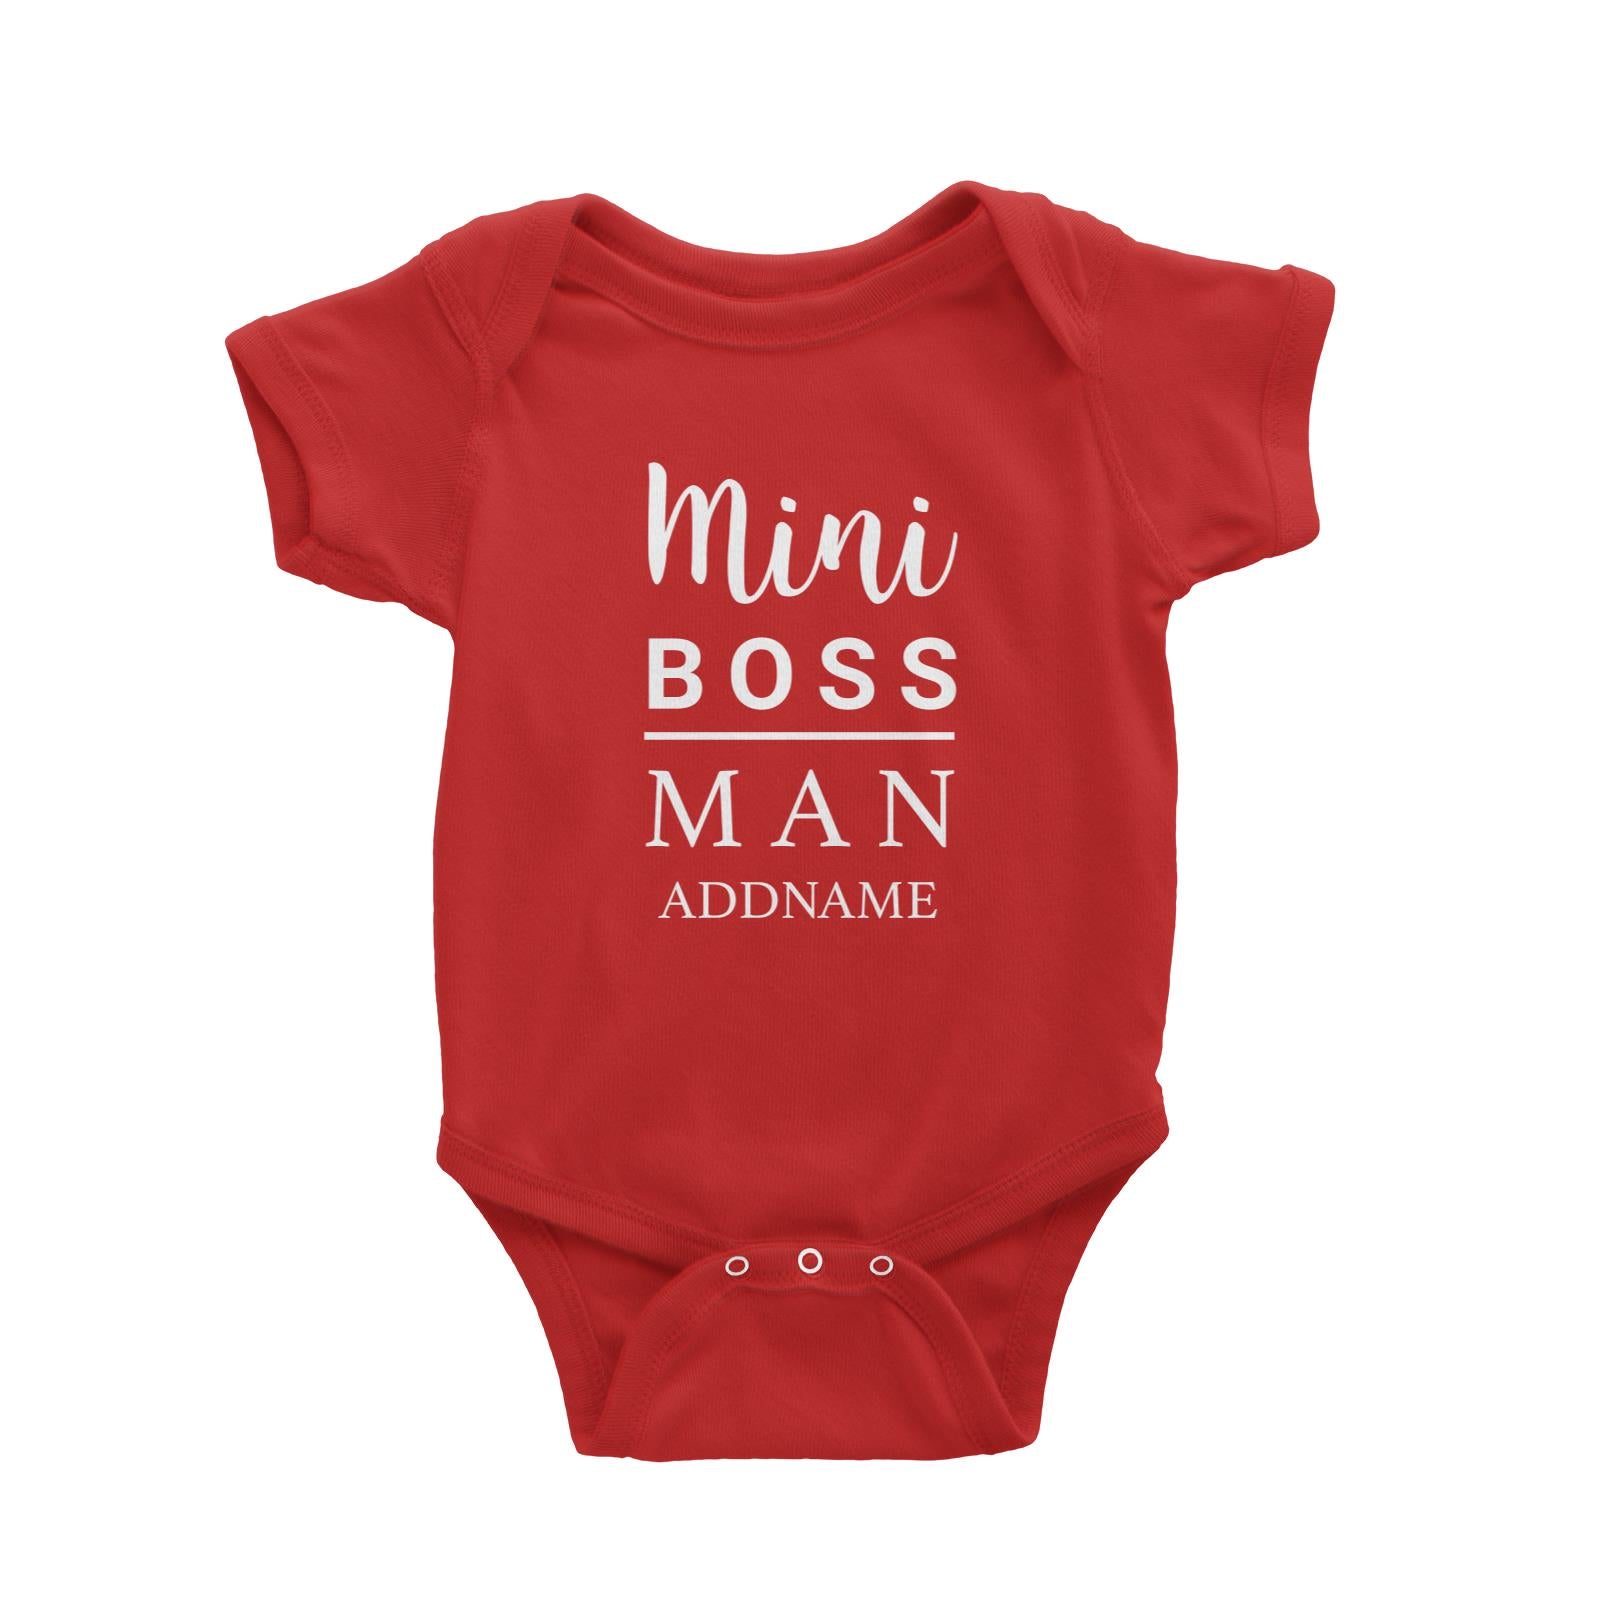 Mini Boss Man Addname Baby Romper  Matching Family Personalizable Designs